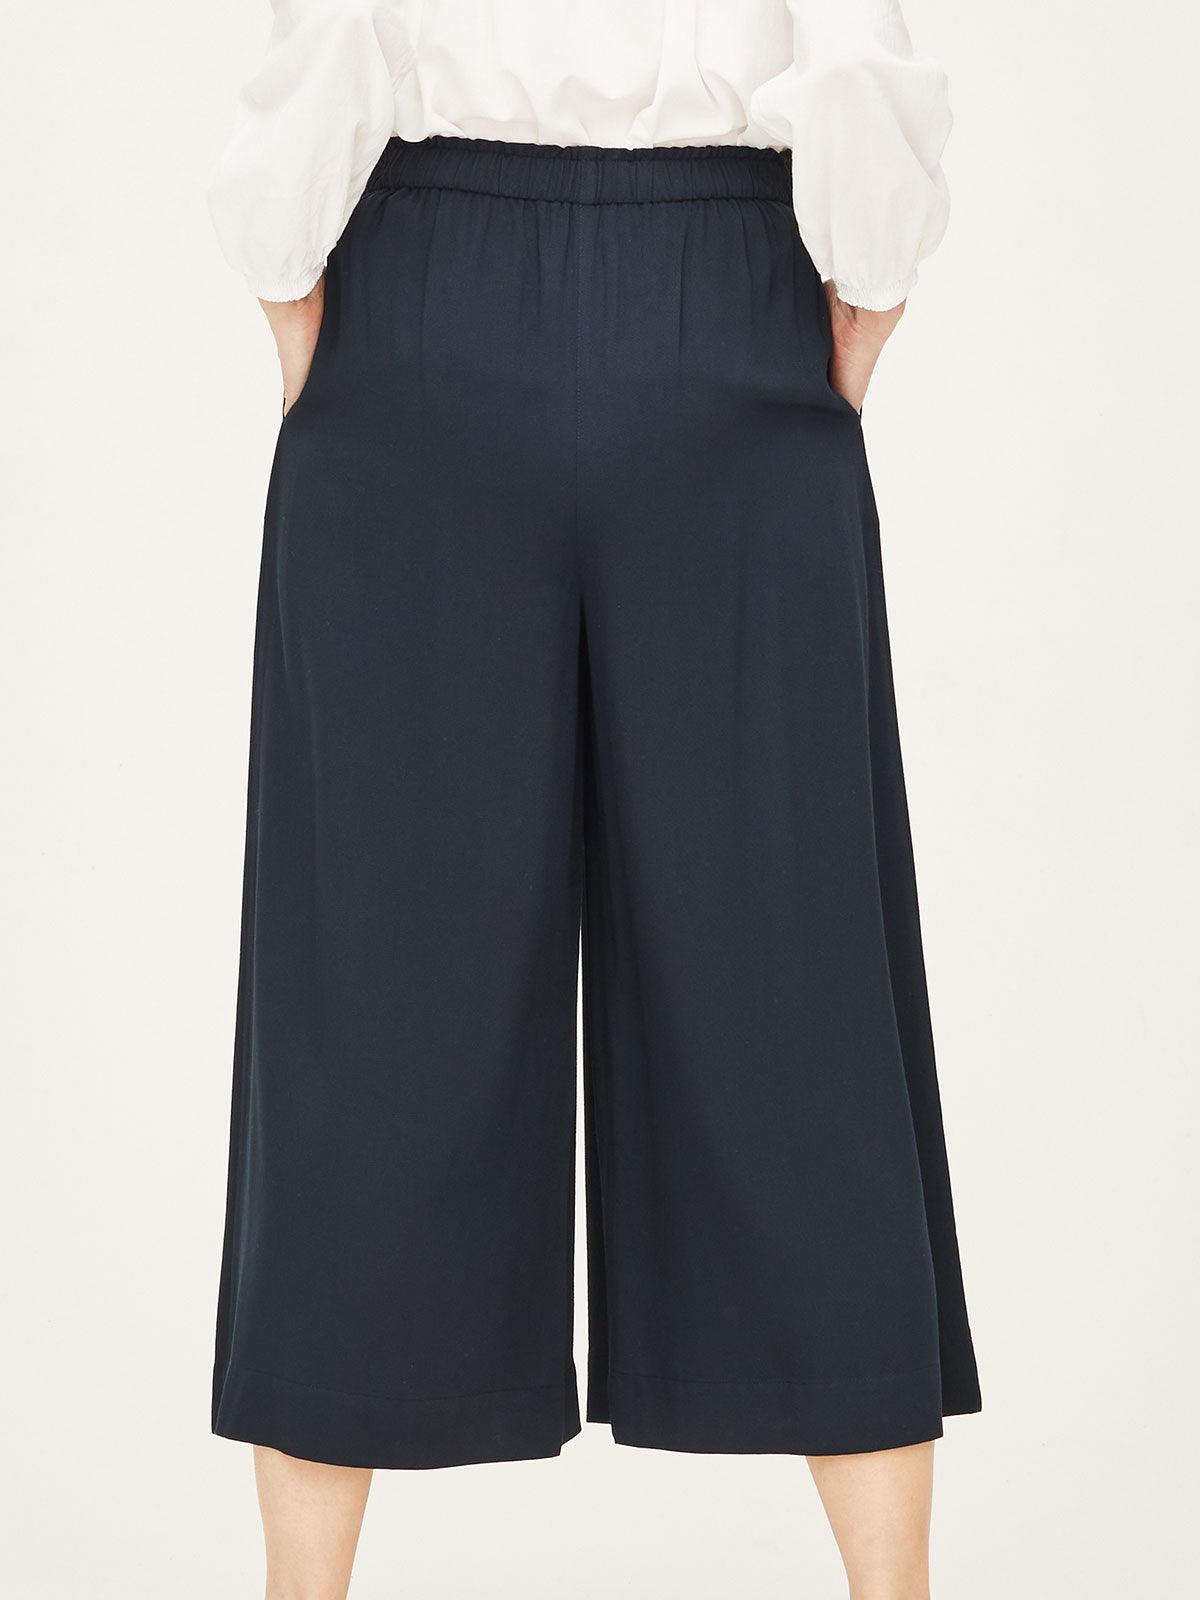 Jennie Modal Pleated Culottes - Thought Clothing UK